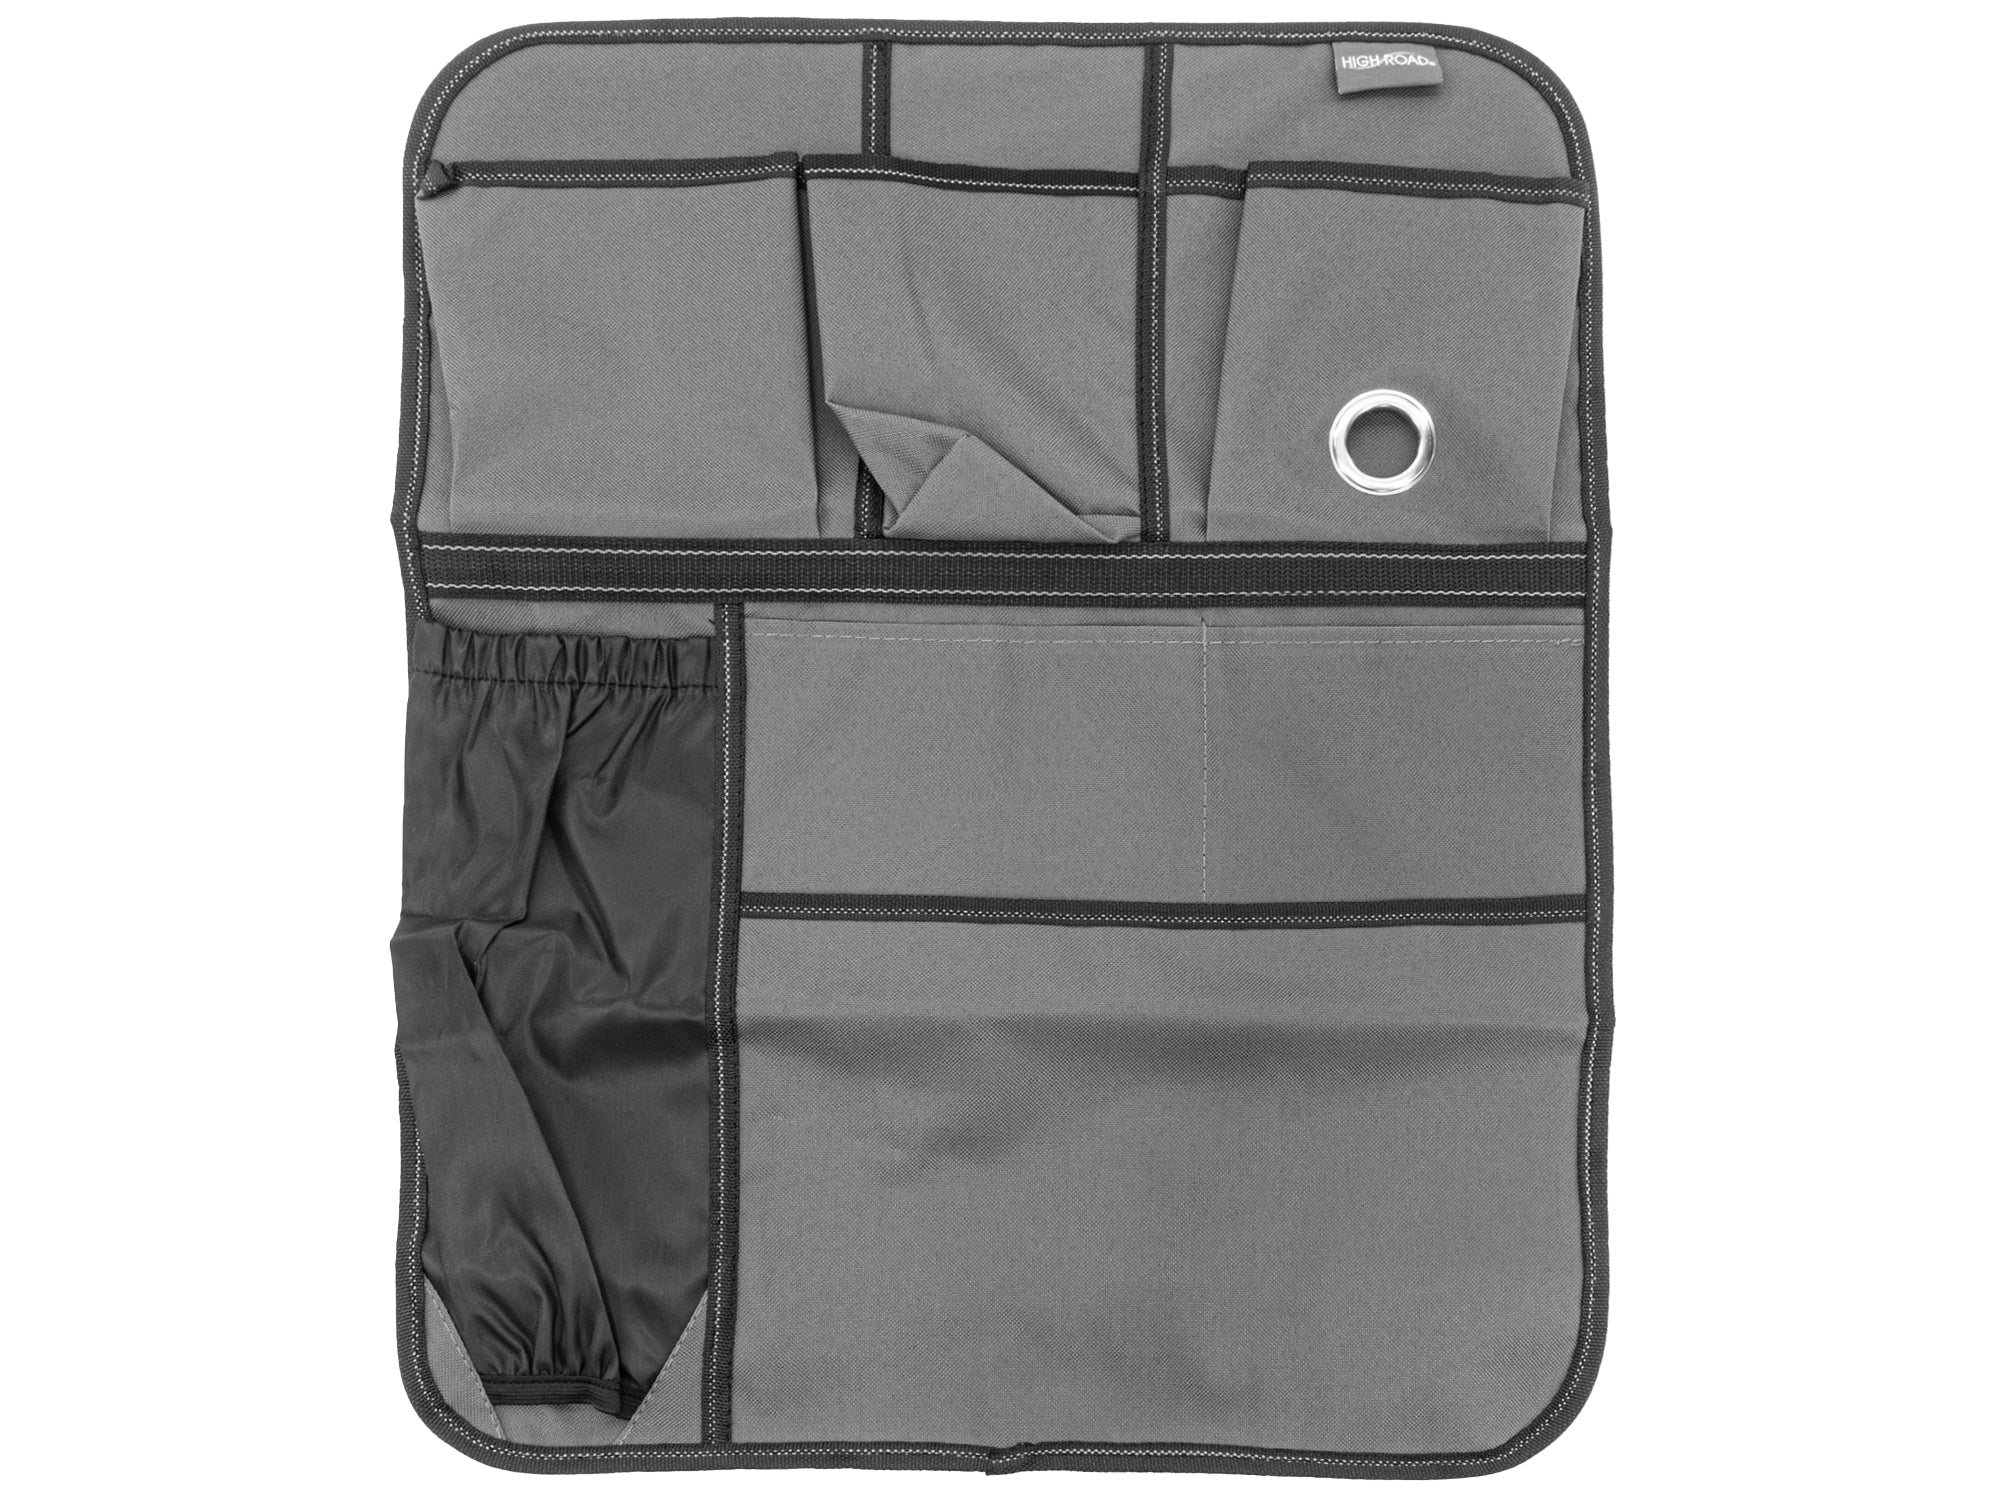 Nirvana Seatback Travel Organizer: Keep kids' travel activities, snacks and  gear handy in this 2-in-1 in…